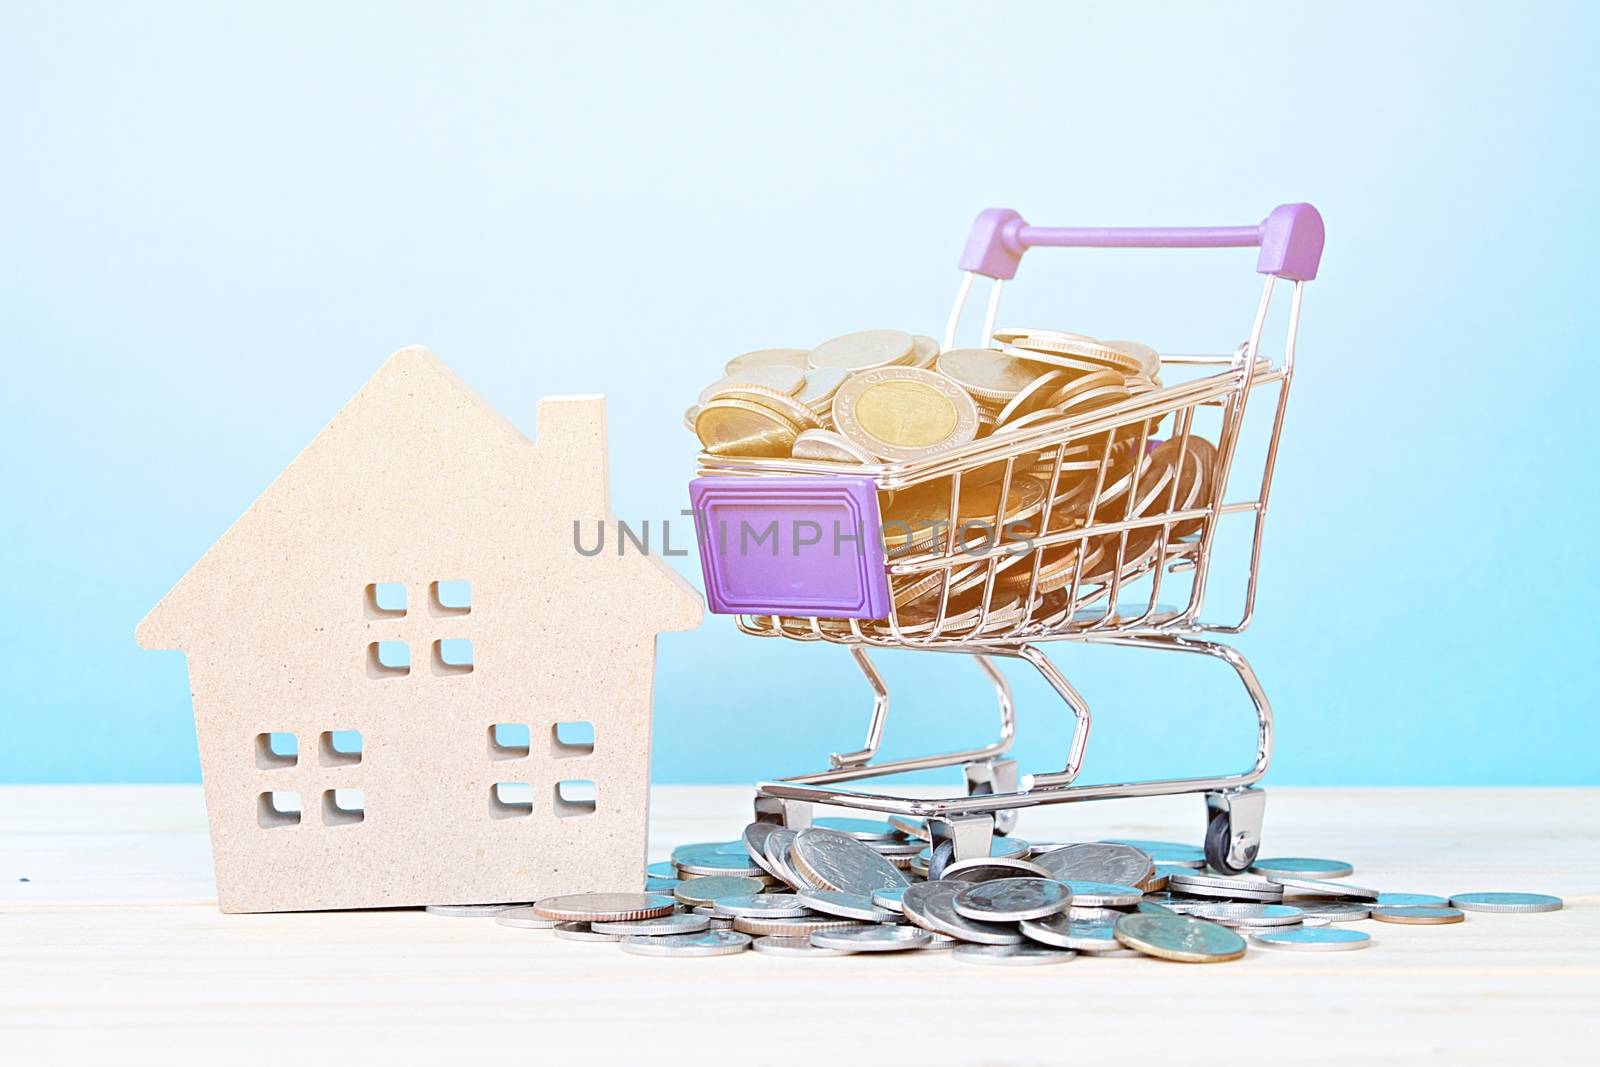 Business, finance, saving money, property ladder or mortgage loan concept : Wood house model, coins and shopping cart on desk table